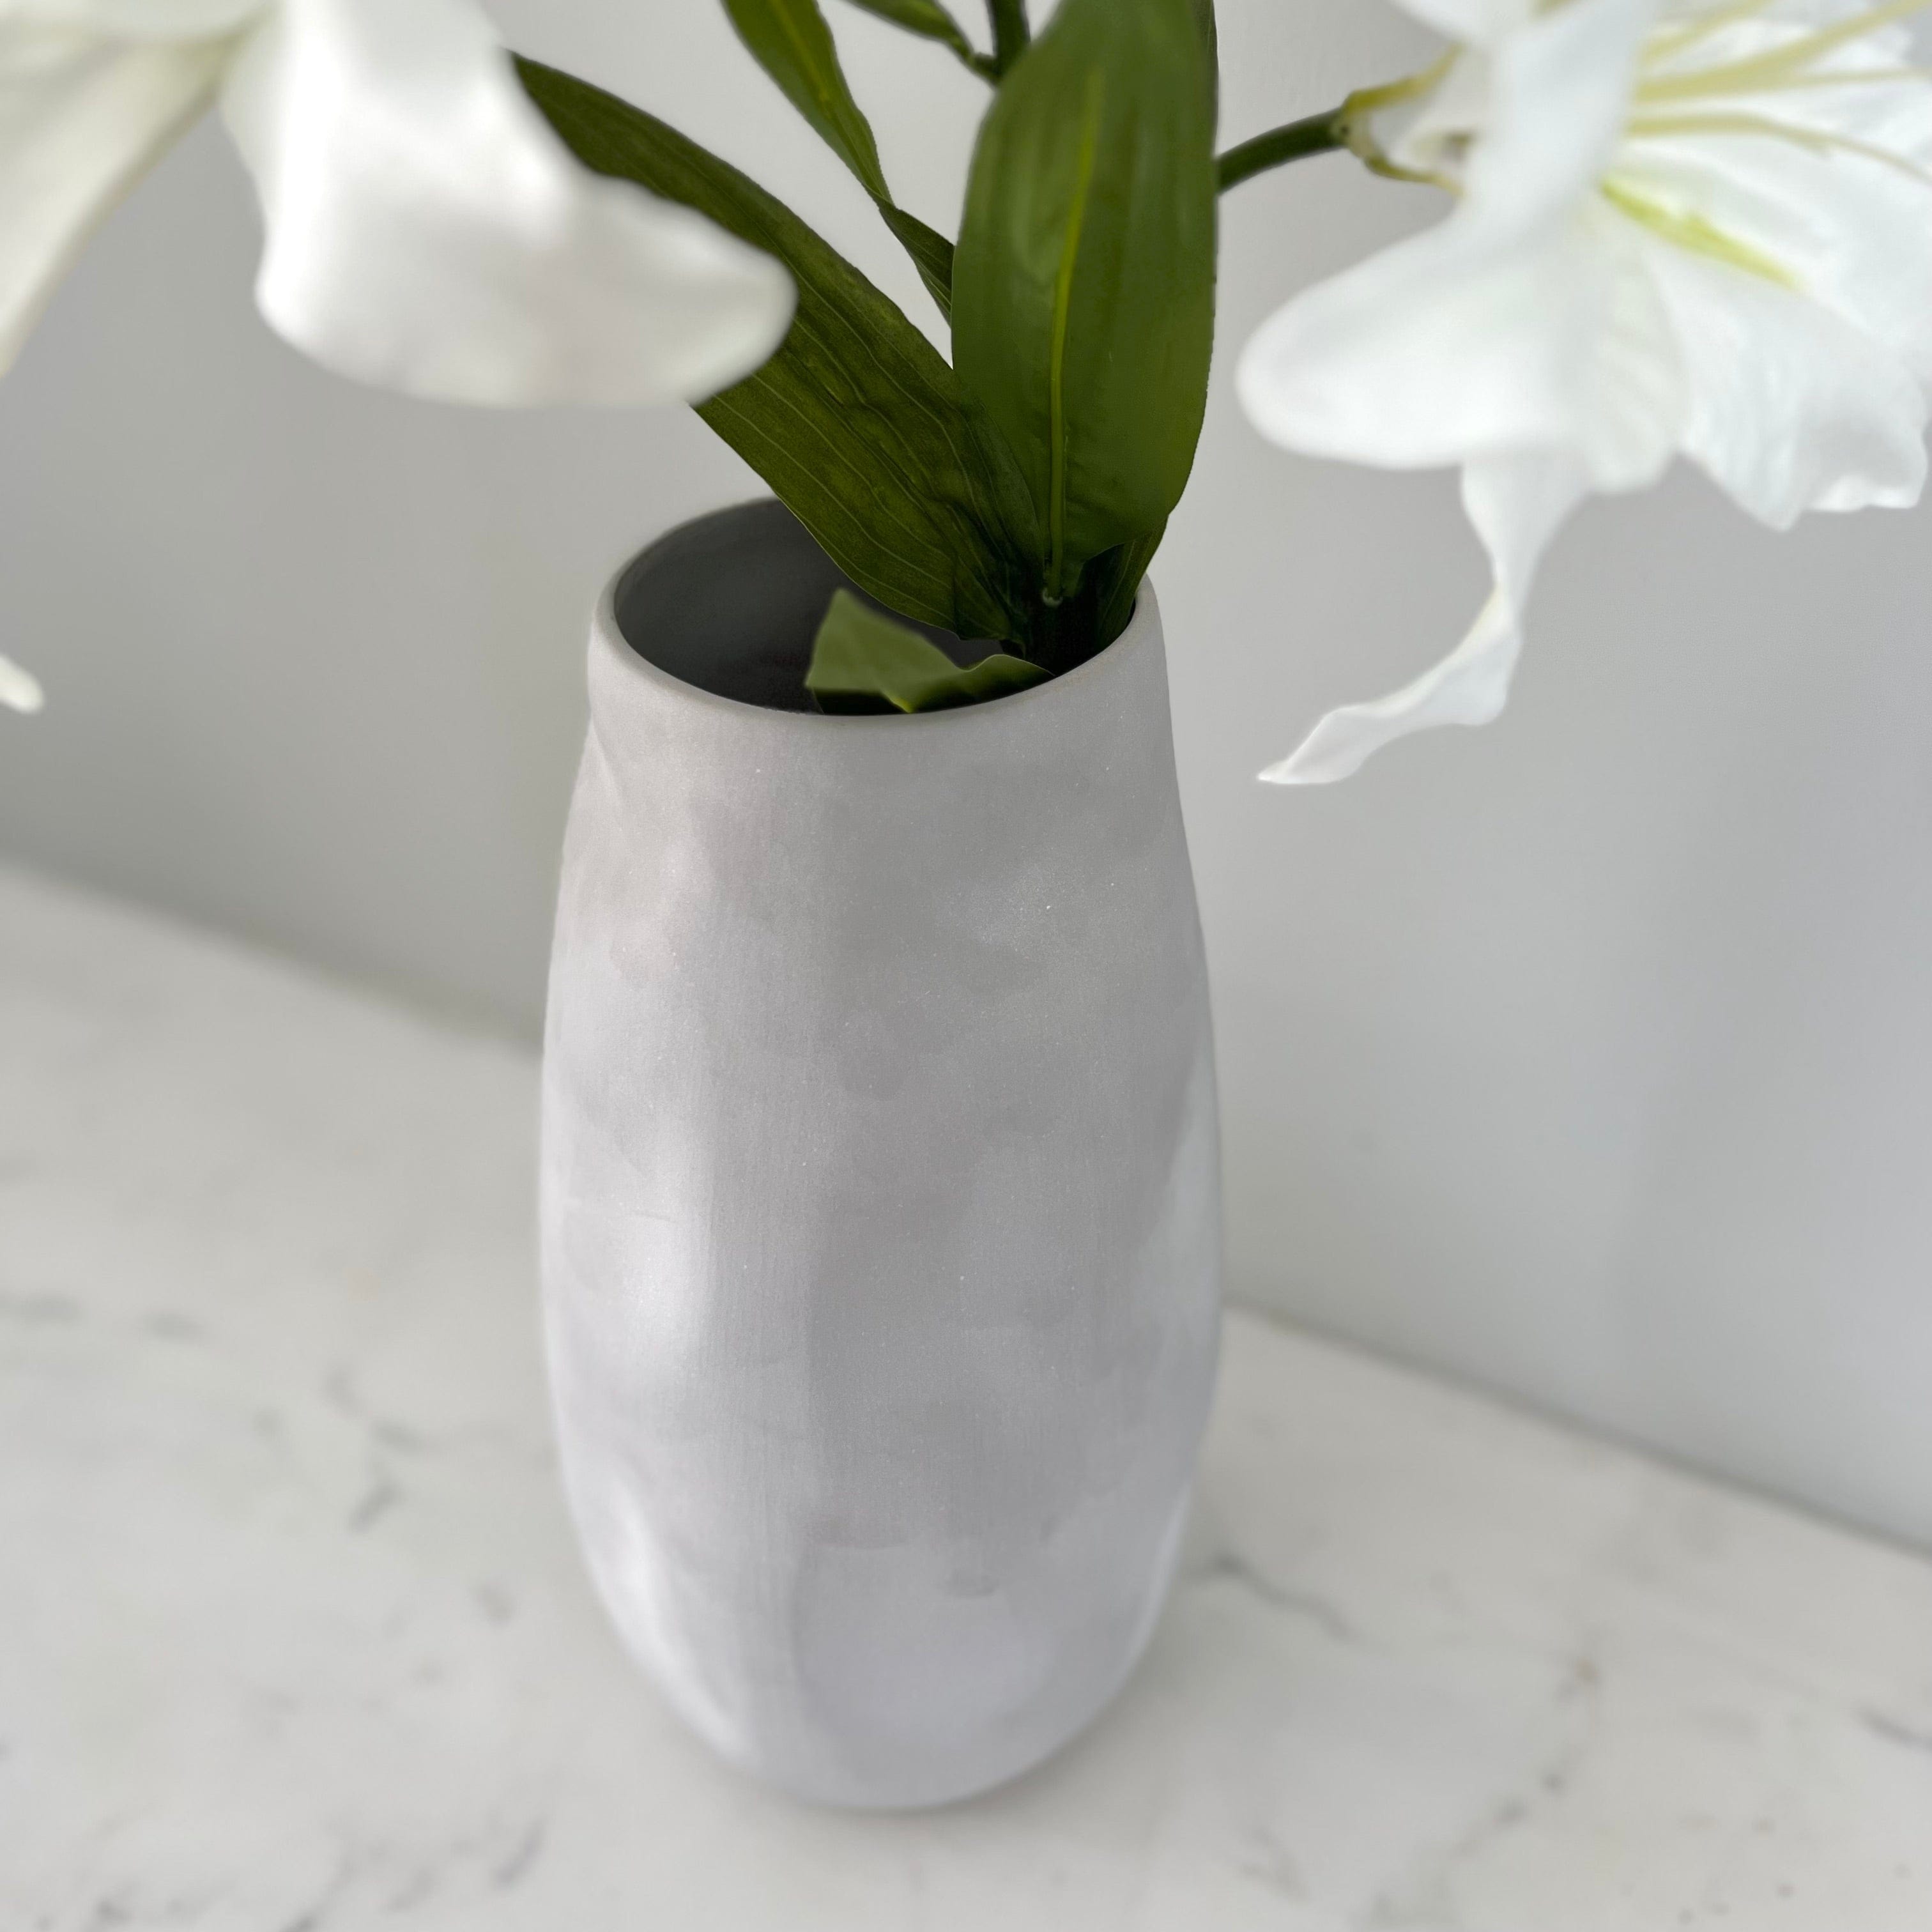 Artificial Flowers in Vase Stylish Vases Grey White Naunton Vase Home Decor and Accessories The Faux Flower Company UK ABP525B